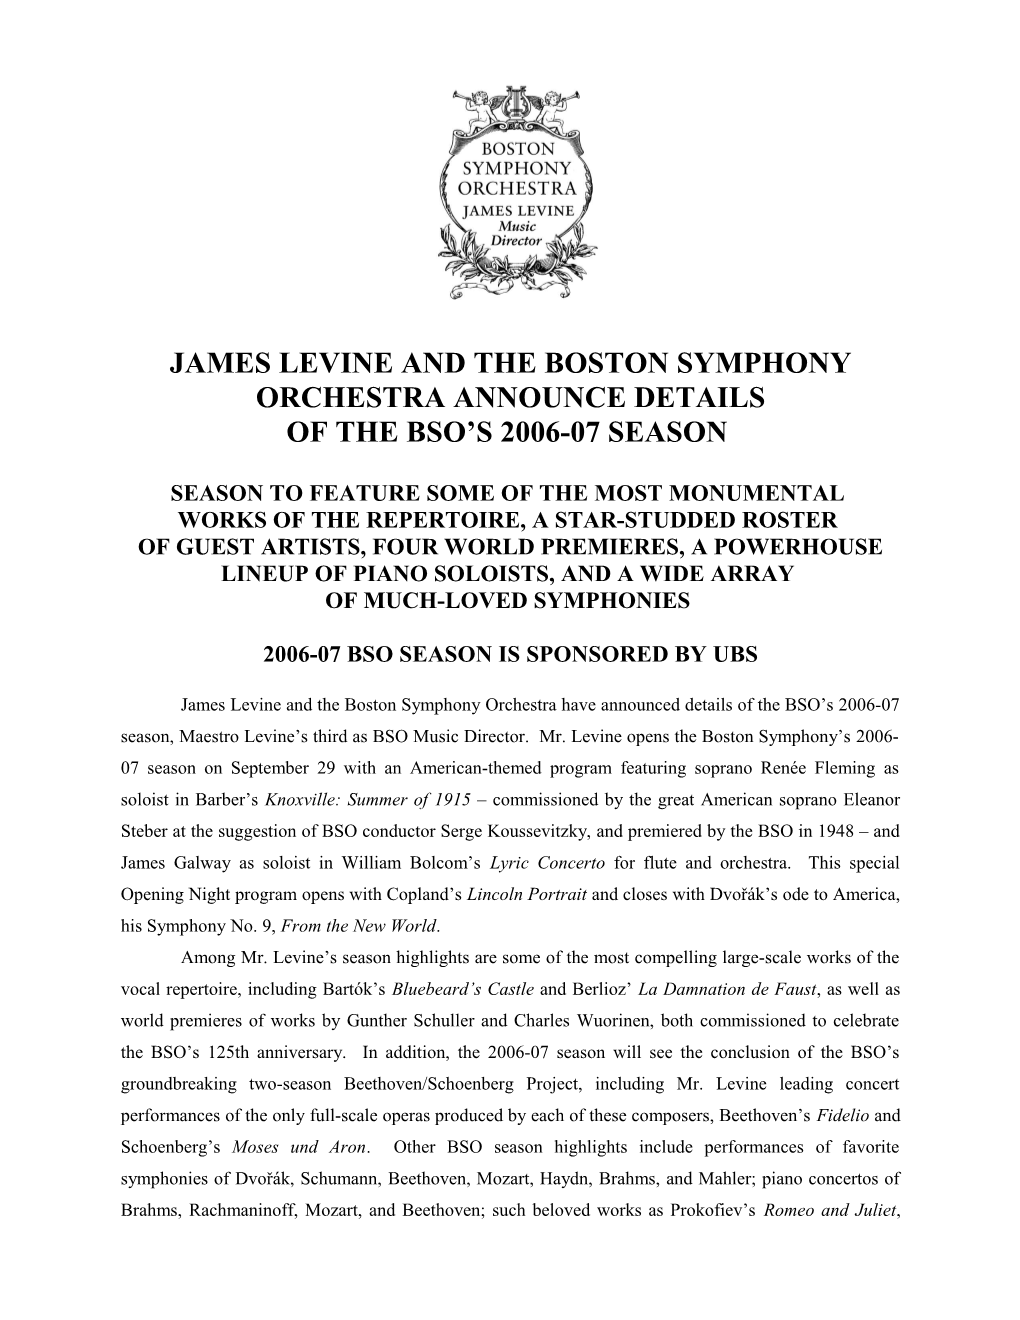 James Levine and the Boston Symphony Orchestra Announce Details